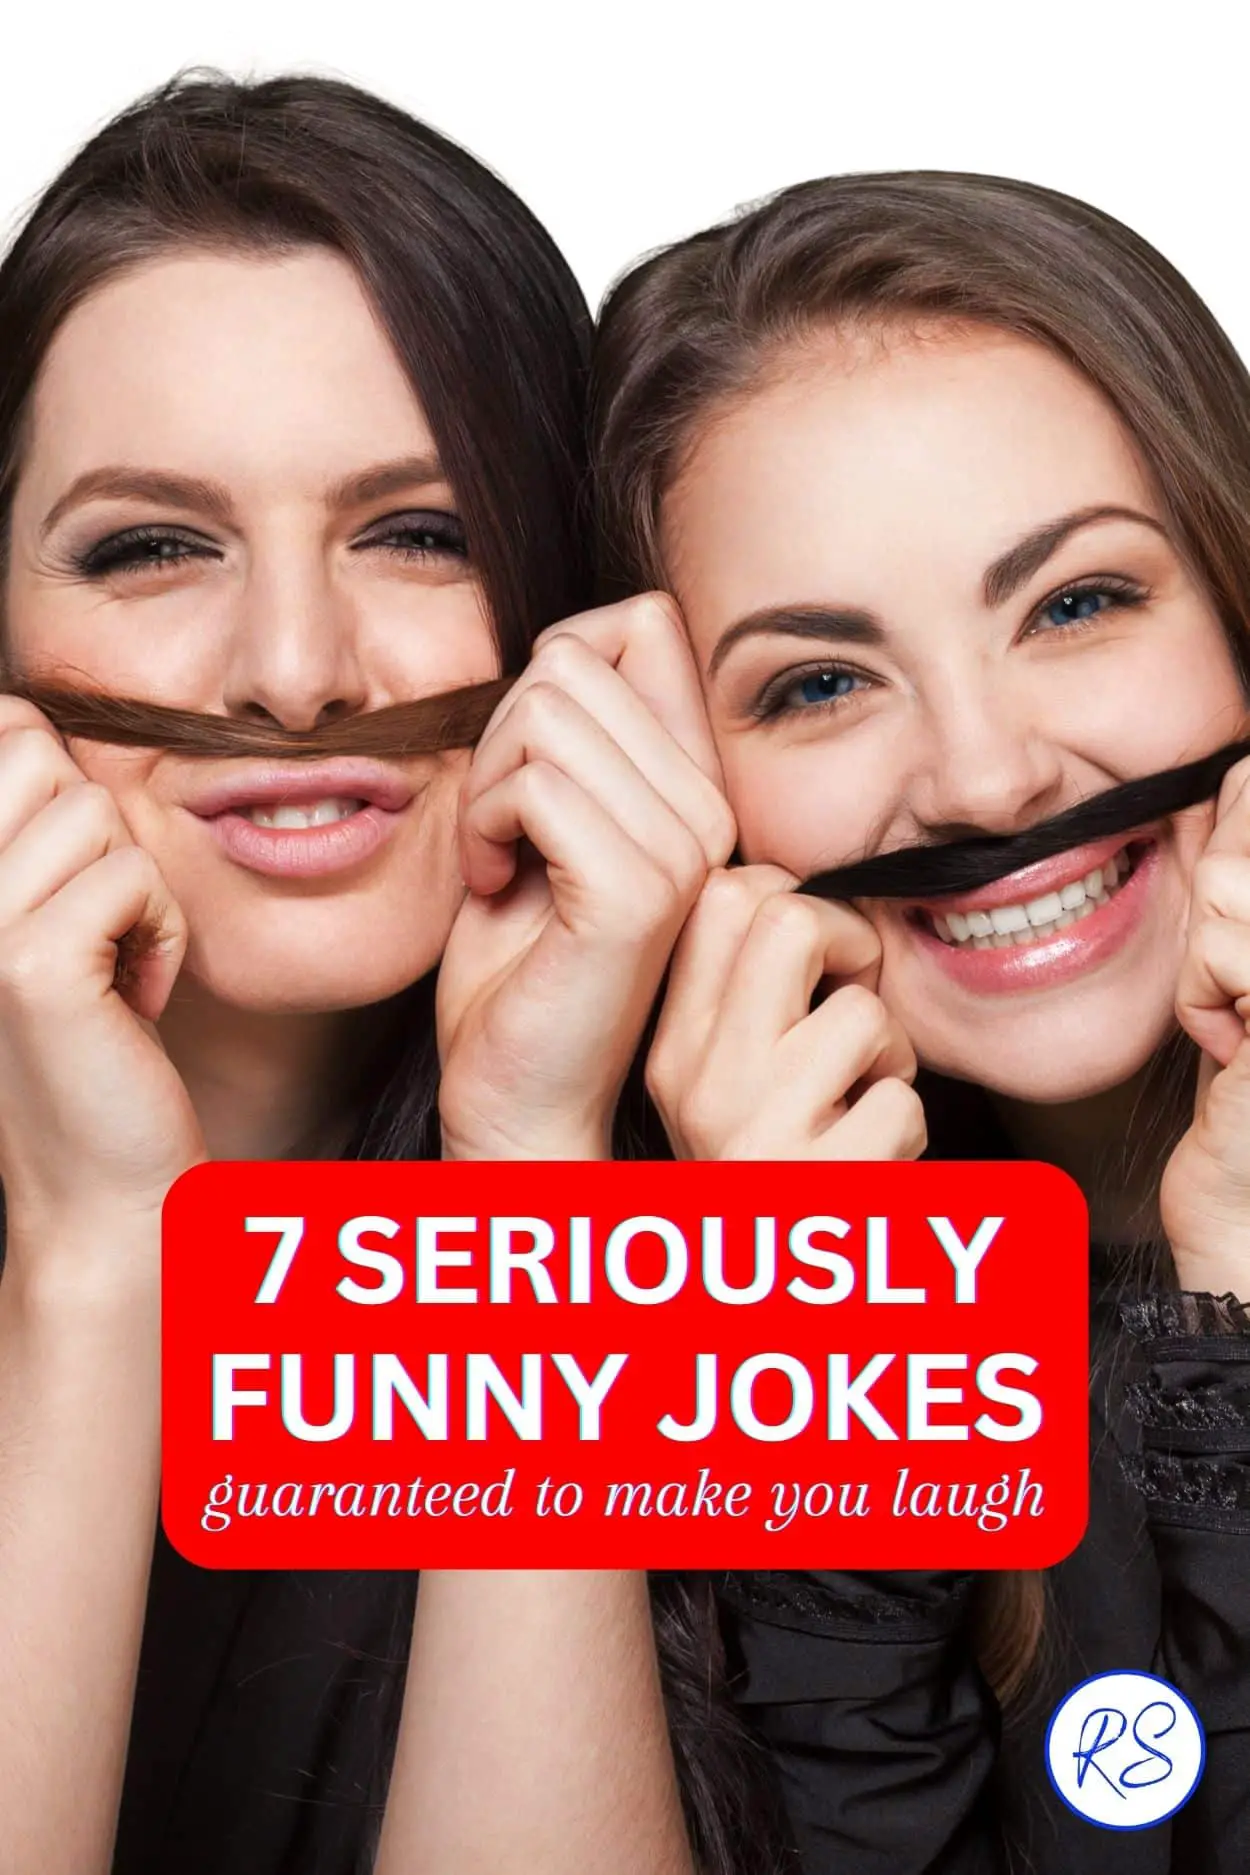 7 seriously funny jokes guaranteed to make you laugh - Roy Sutton